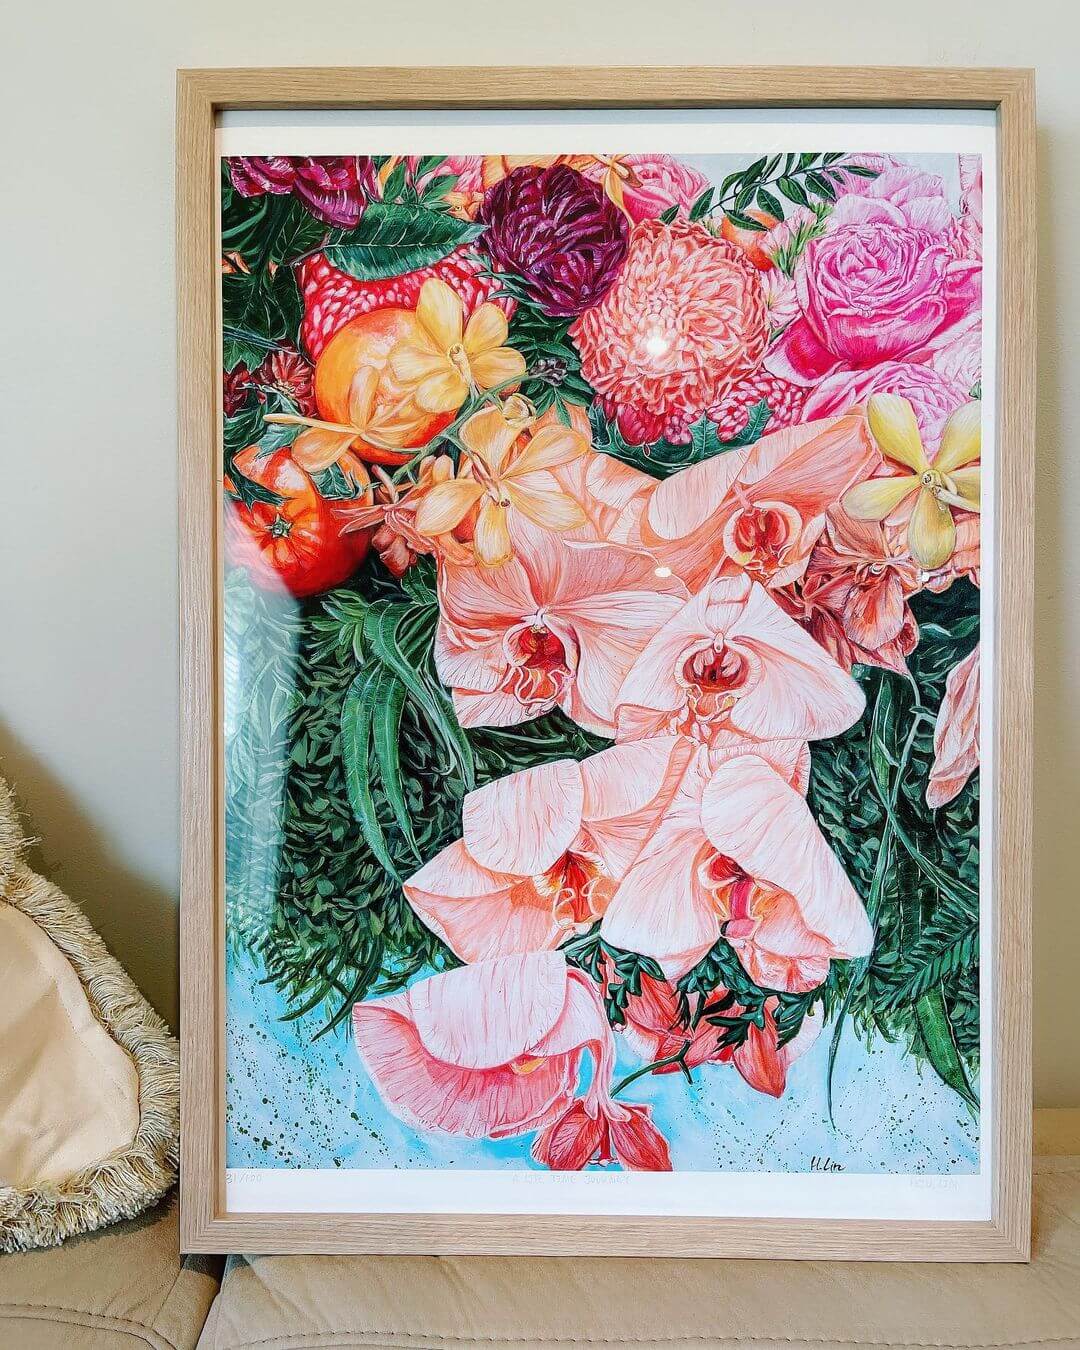 A framed artwork of colourful flowers painted in acrylic standing on a beige couch next to a pillow.